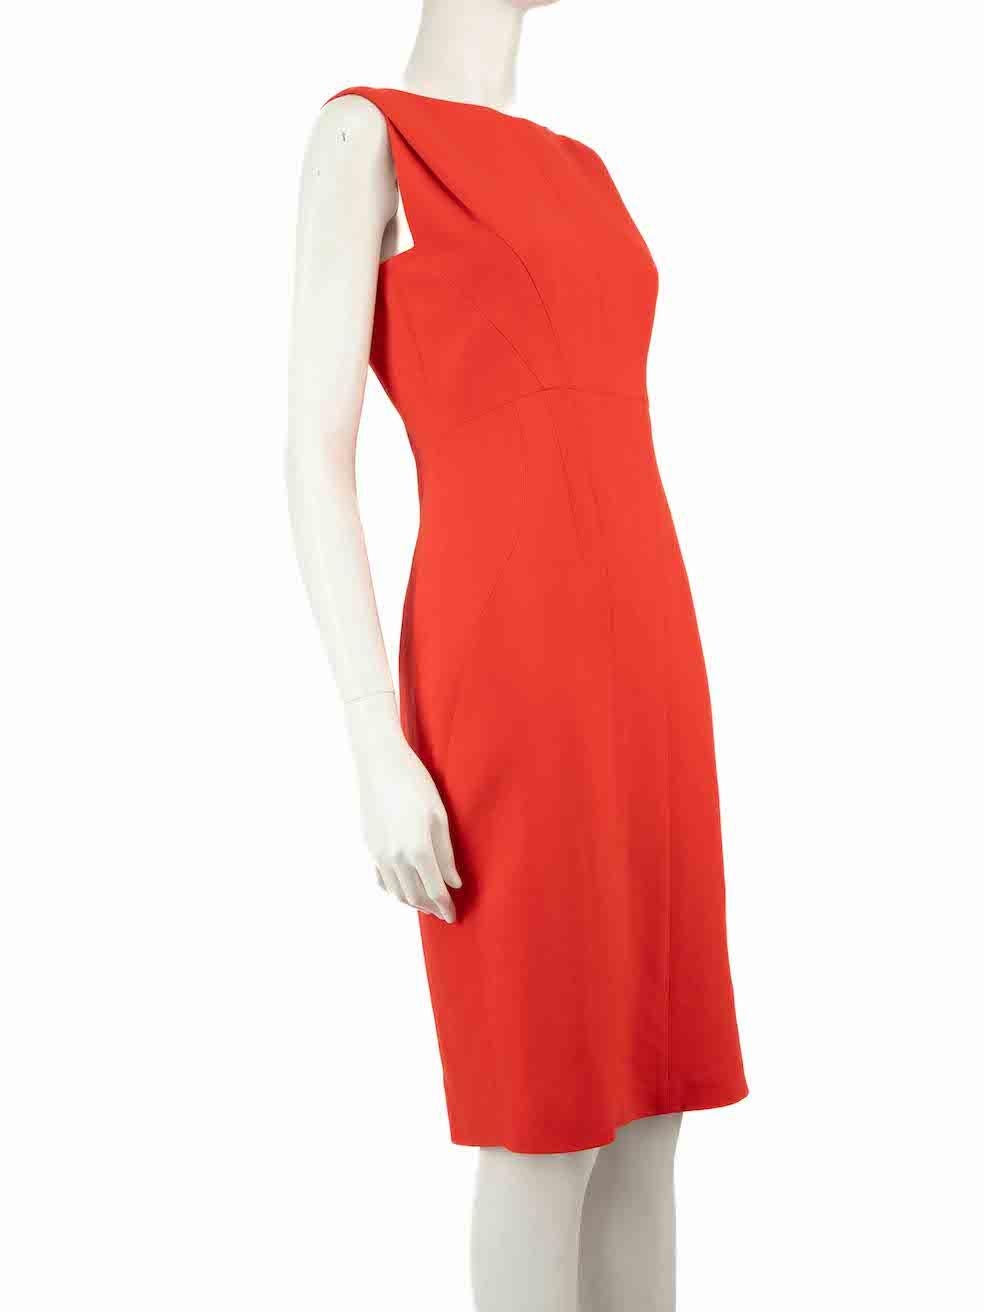 CONDITION is Very good. Minimal wear to dress is evident where the hook near side zip is misshapen. Part of the label tag has been cut off on this used Antonio Berardi designer resale item.
 
 
 
 Details
 
 
 Red
 
 Wool
 
 Knee length dress
 
